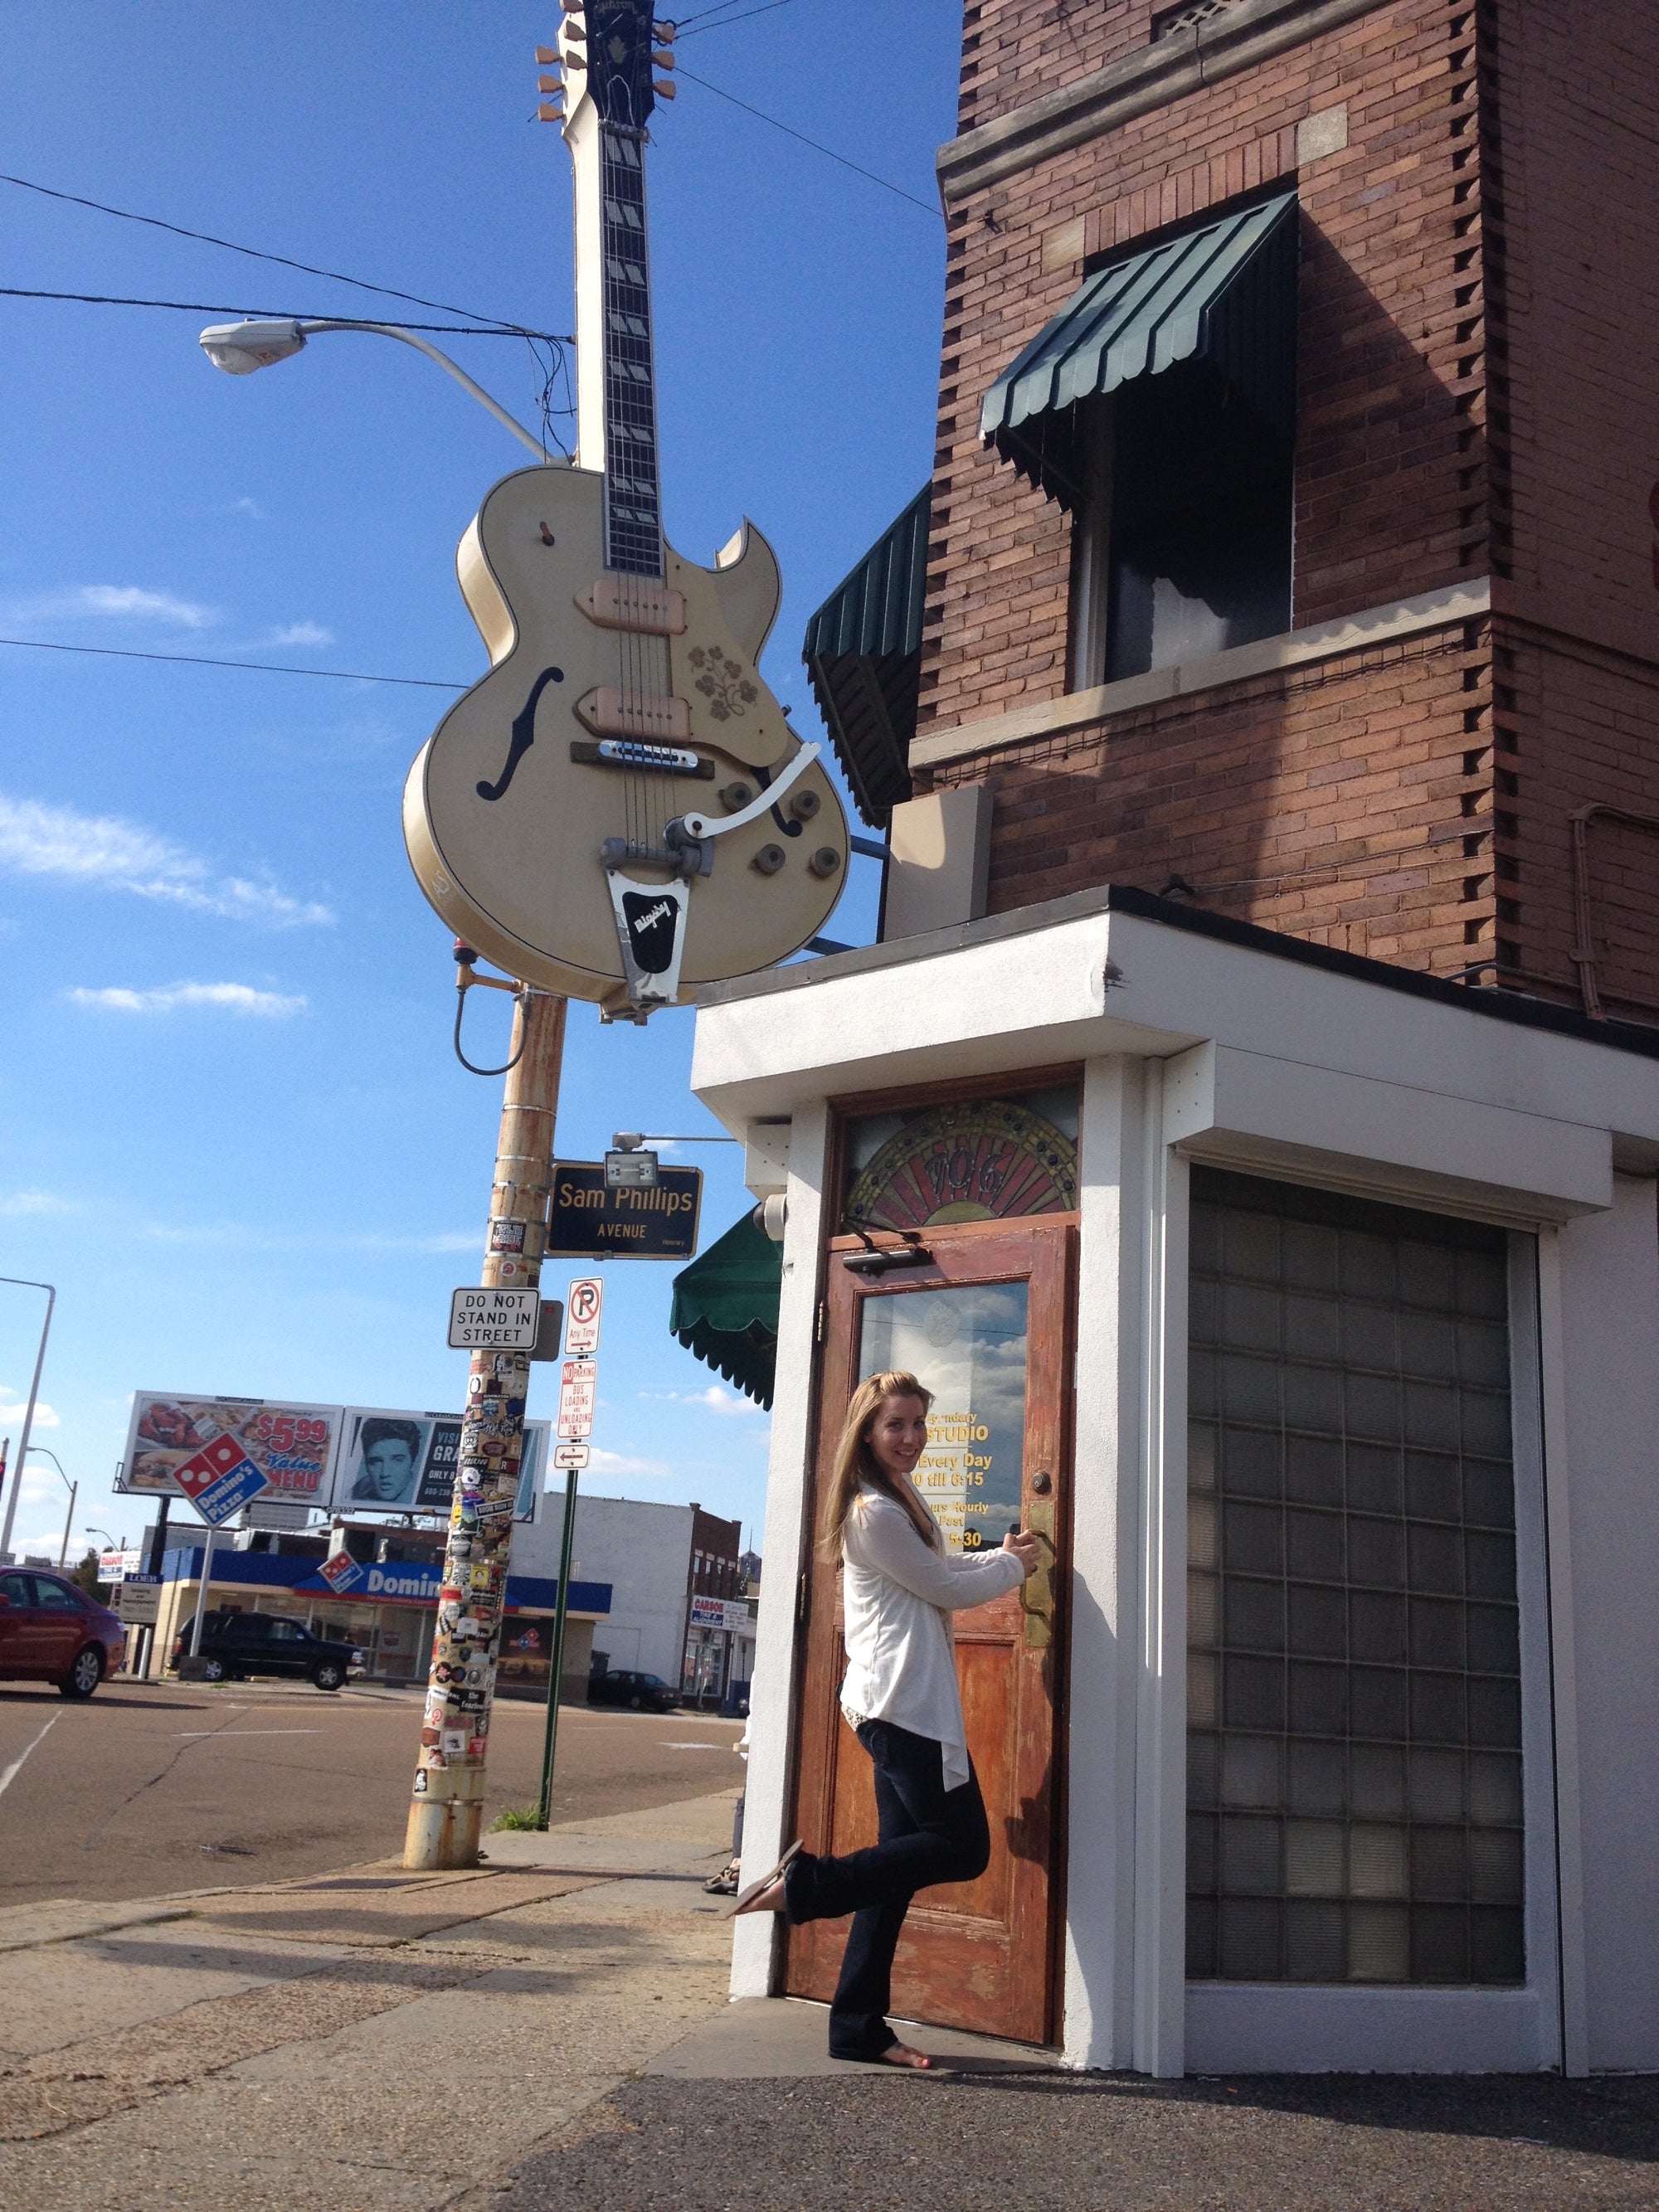 The Drllevich Sisters take Tennessee, Part 1: Walking in Memphis